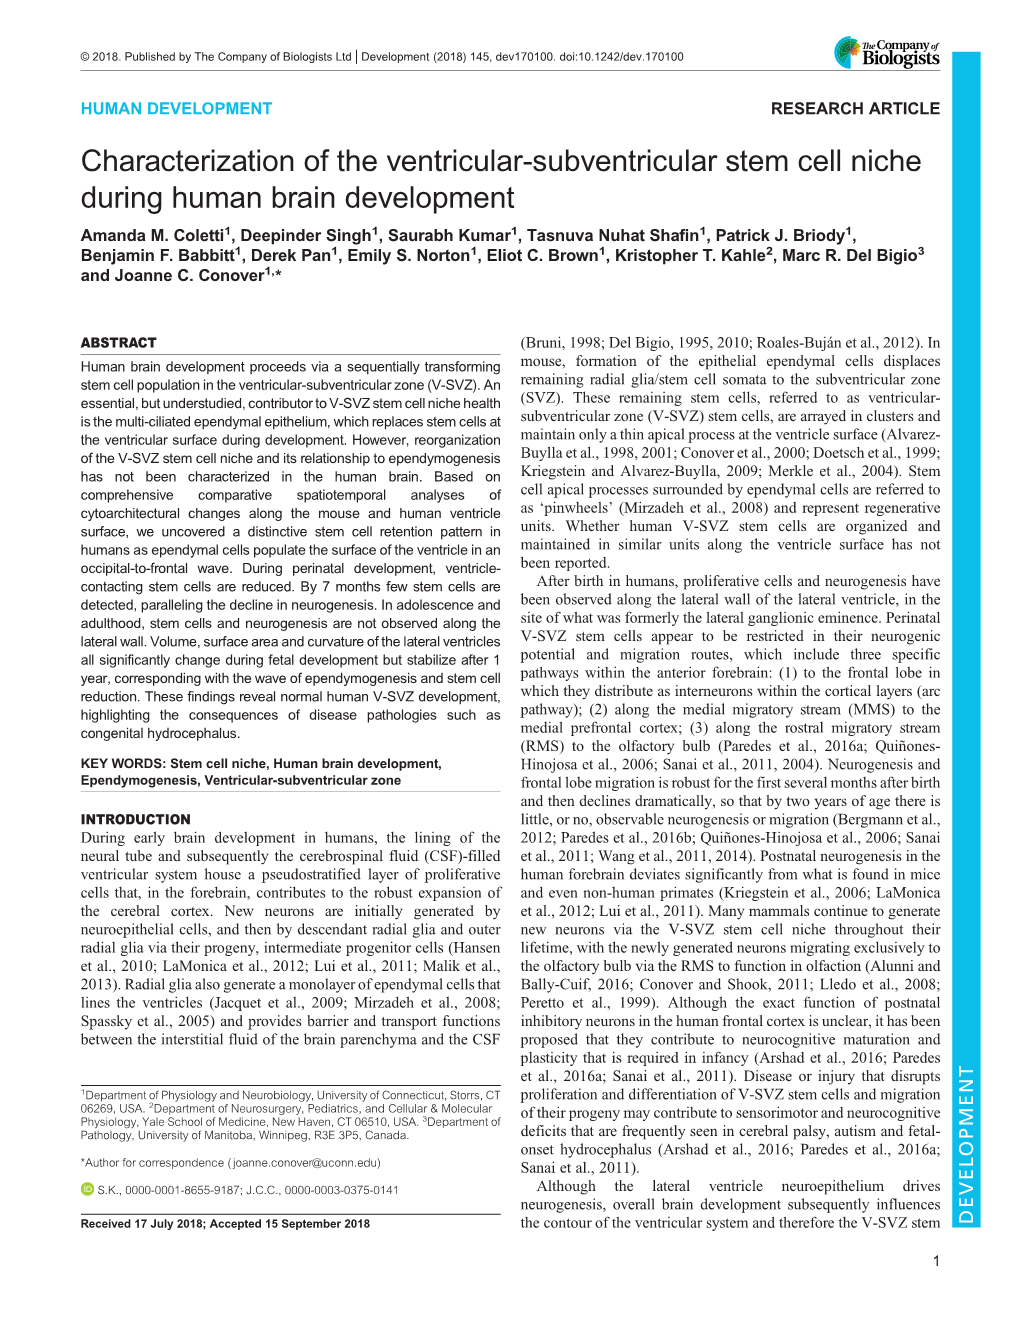 Characterization of the Ventricular-Subventricular Stem Cell Niche During Human Brain Development Amanda M